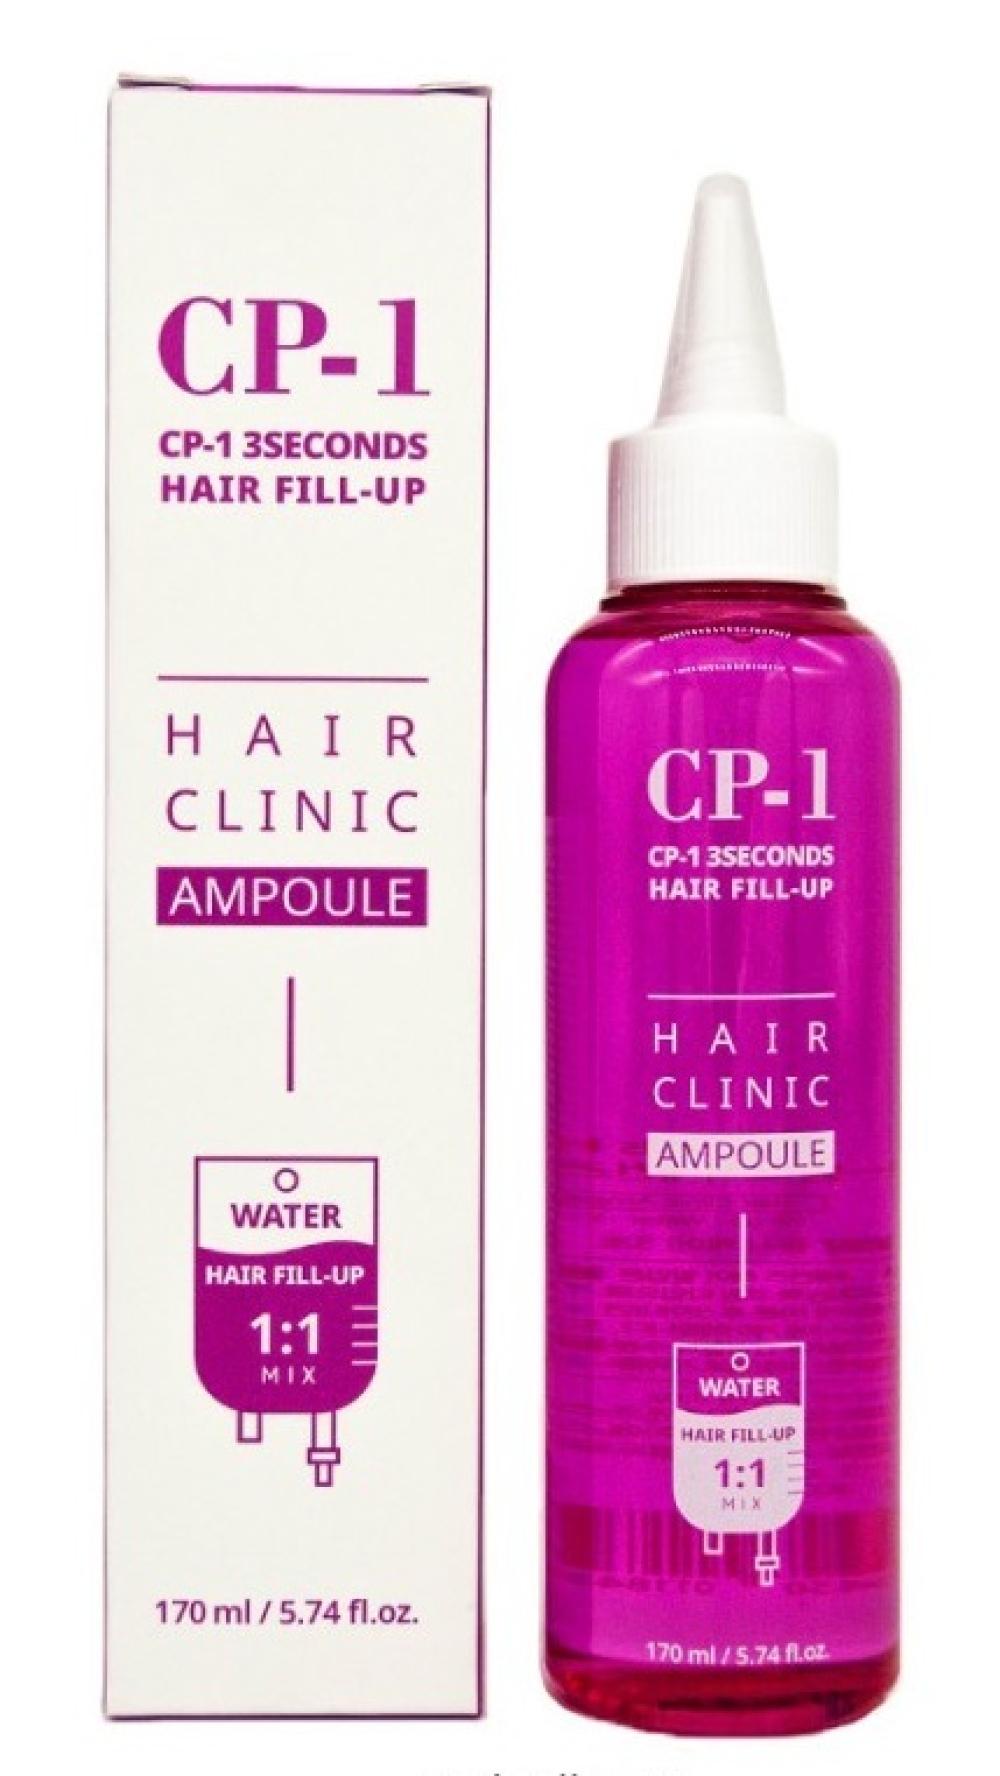 Филлер для волос Esthetic House CP-1 3 Seconds Hair Ringer Hair Fill-up Ampoule, 170 мл